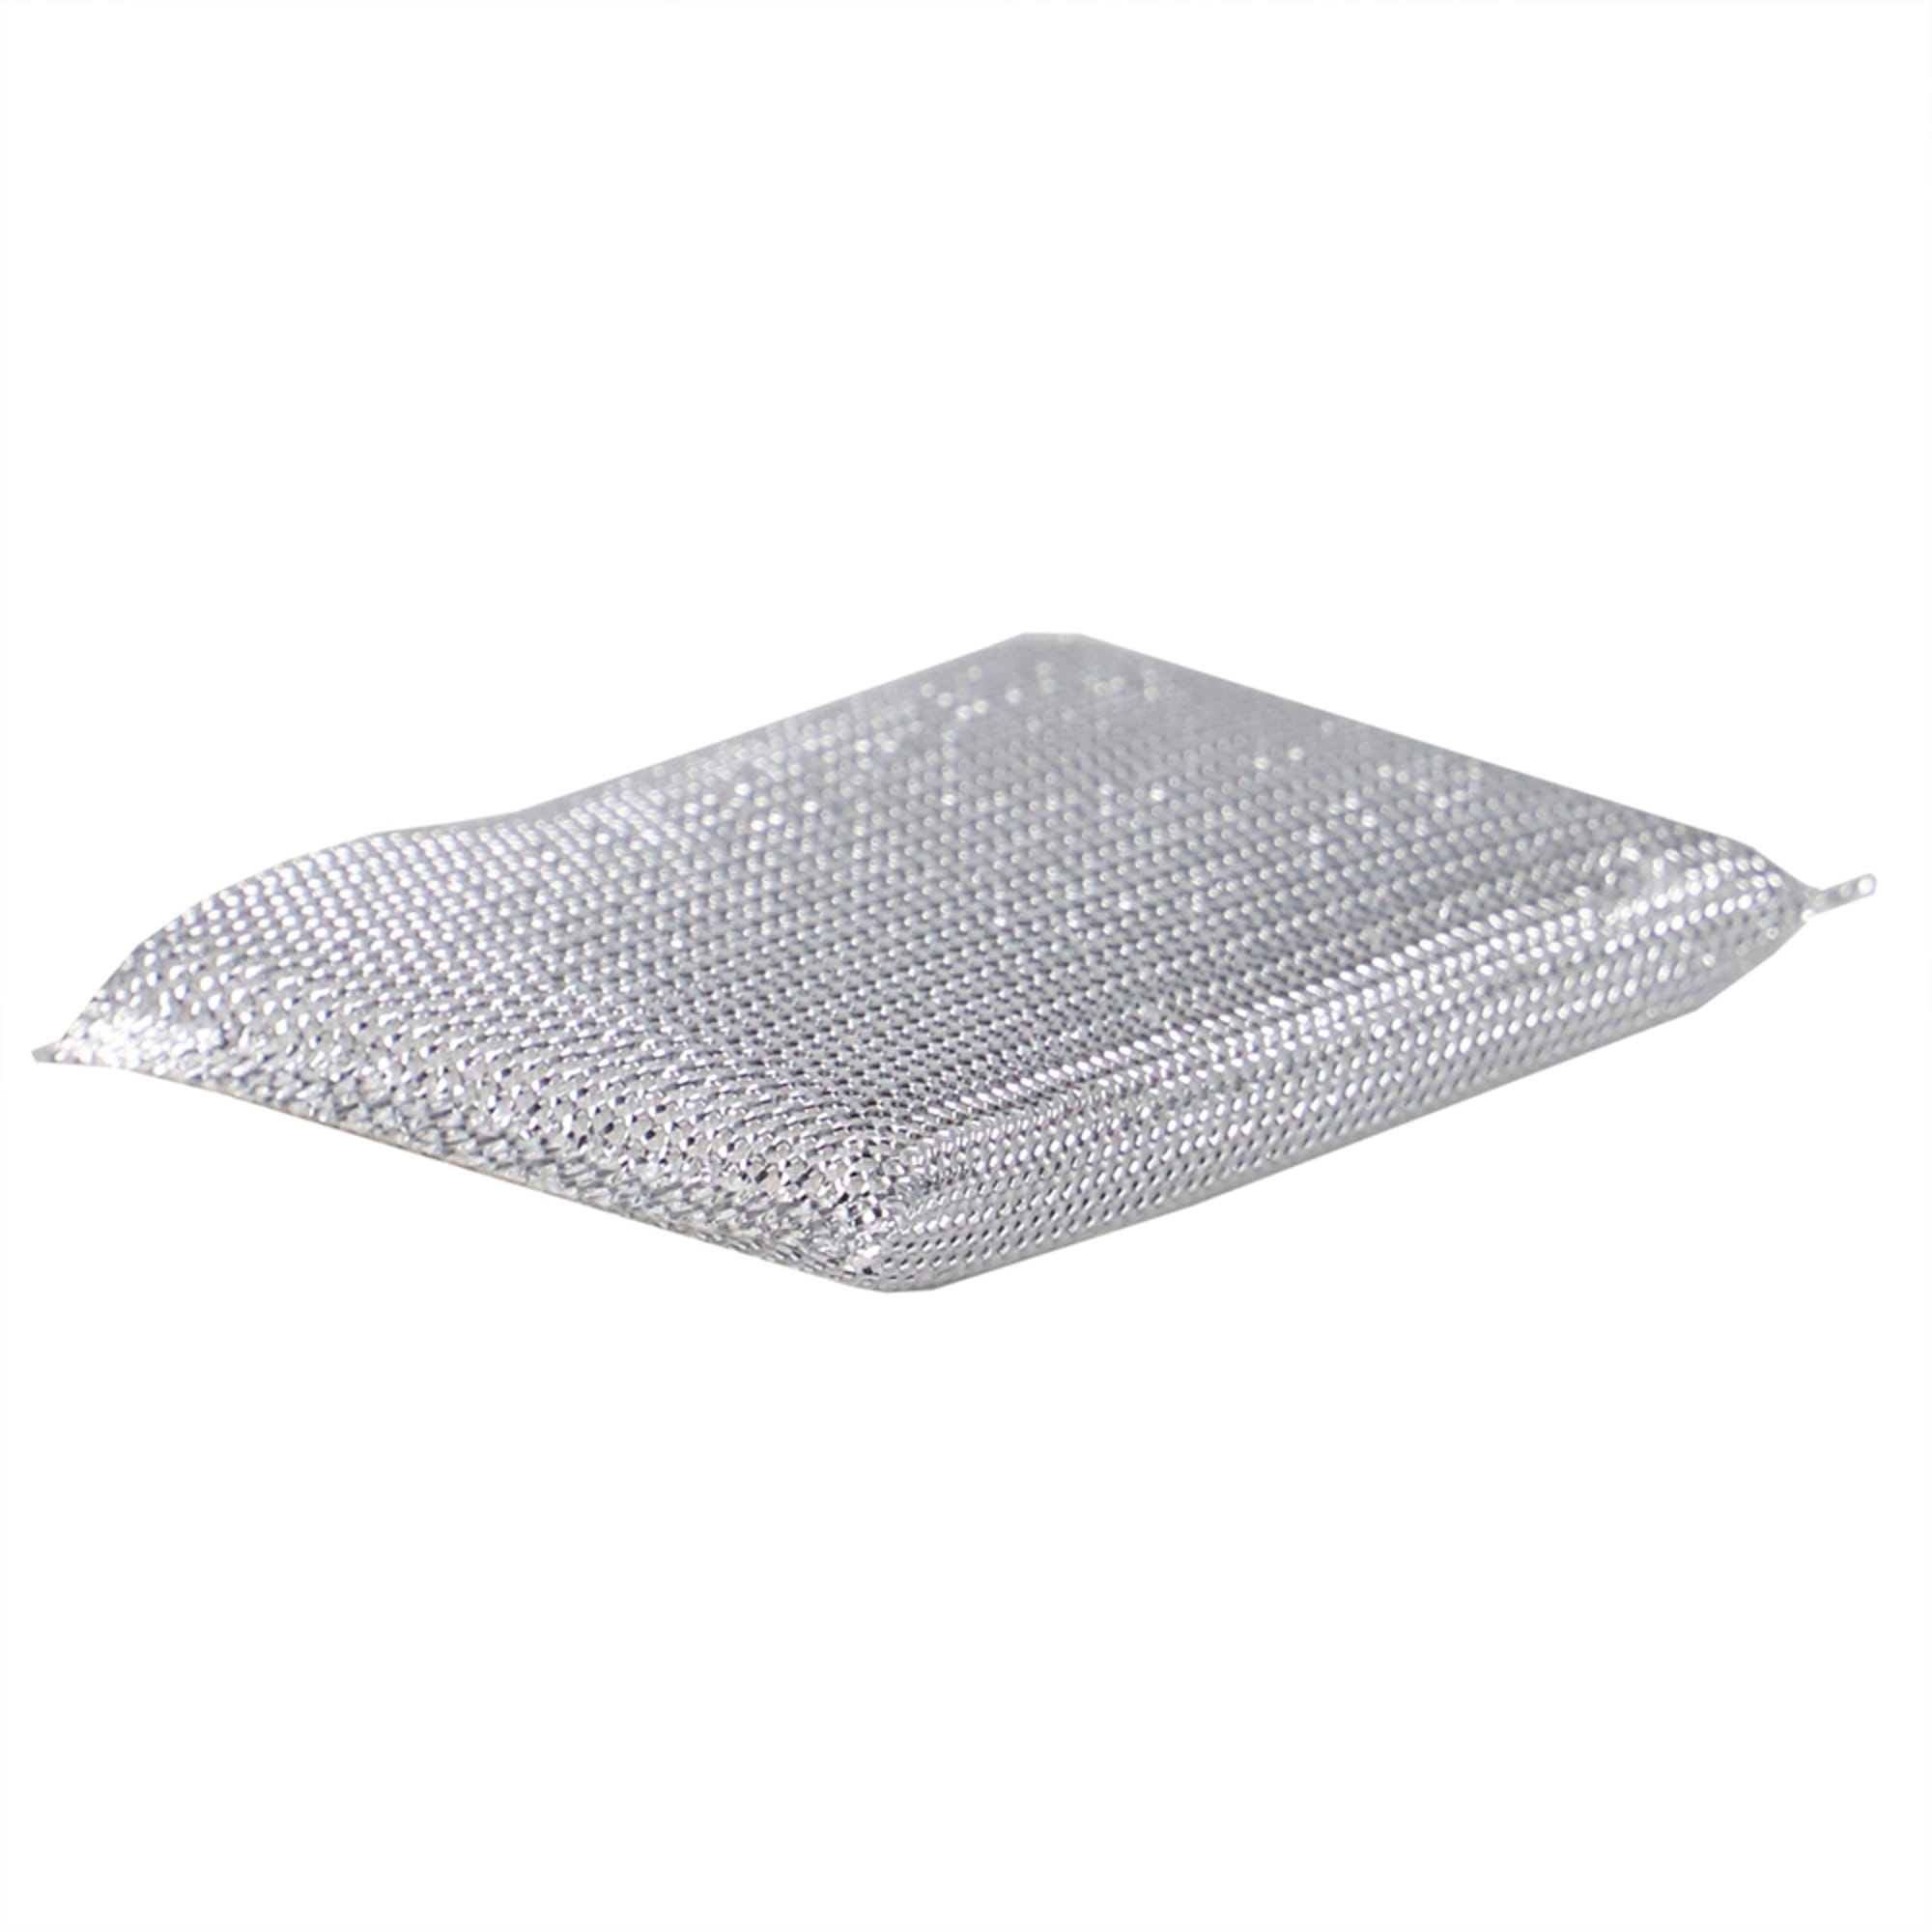 Home Basics Scouring Pads, (Pack of 4), Silver $1.50 EACH, CASE PACK OF 24